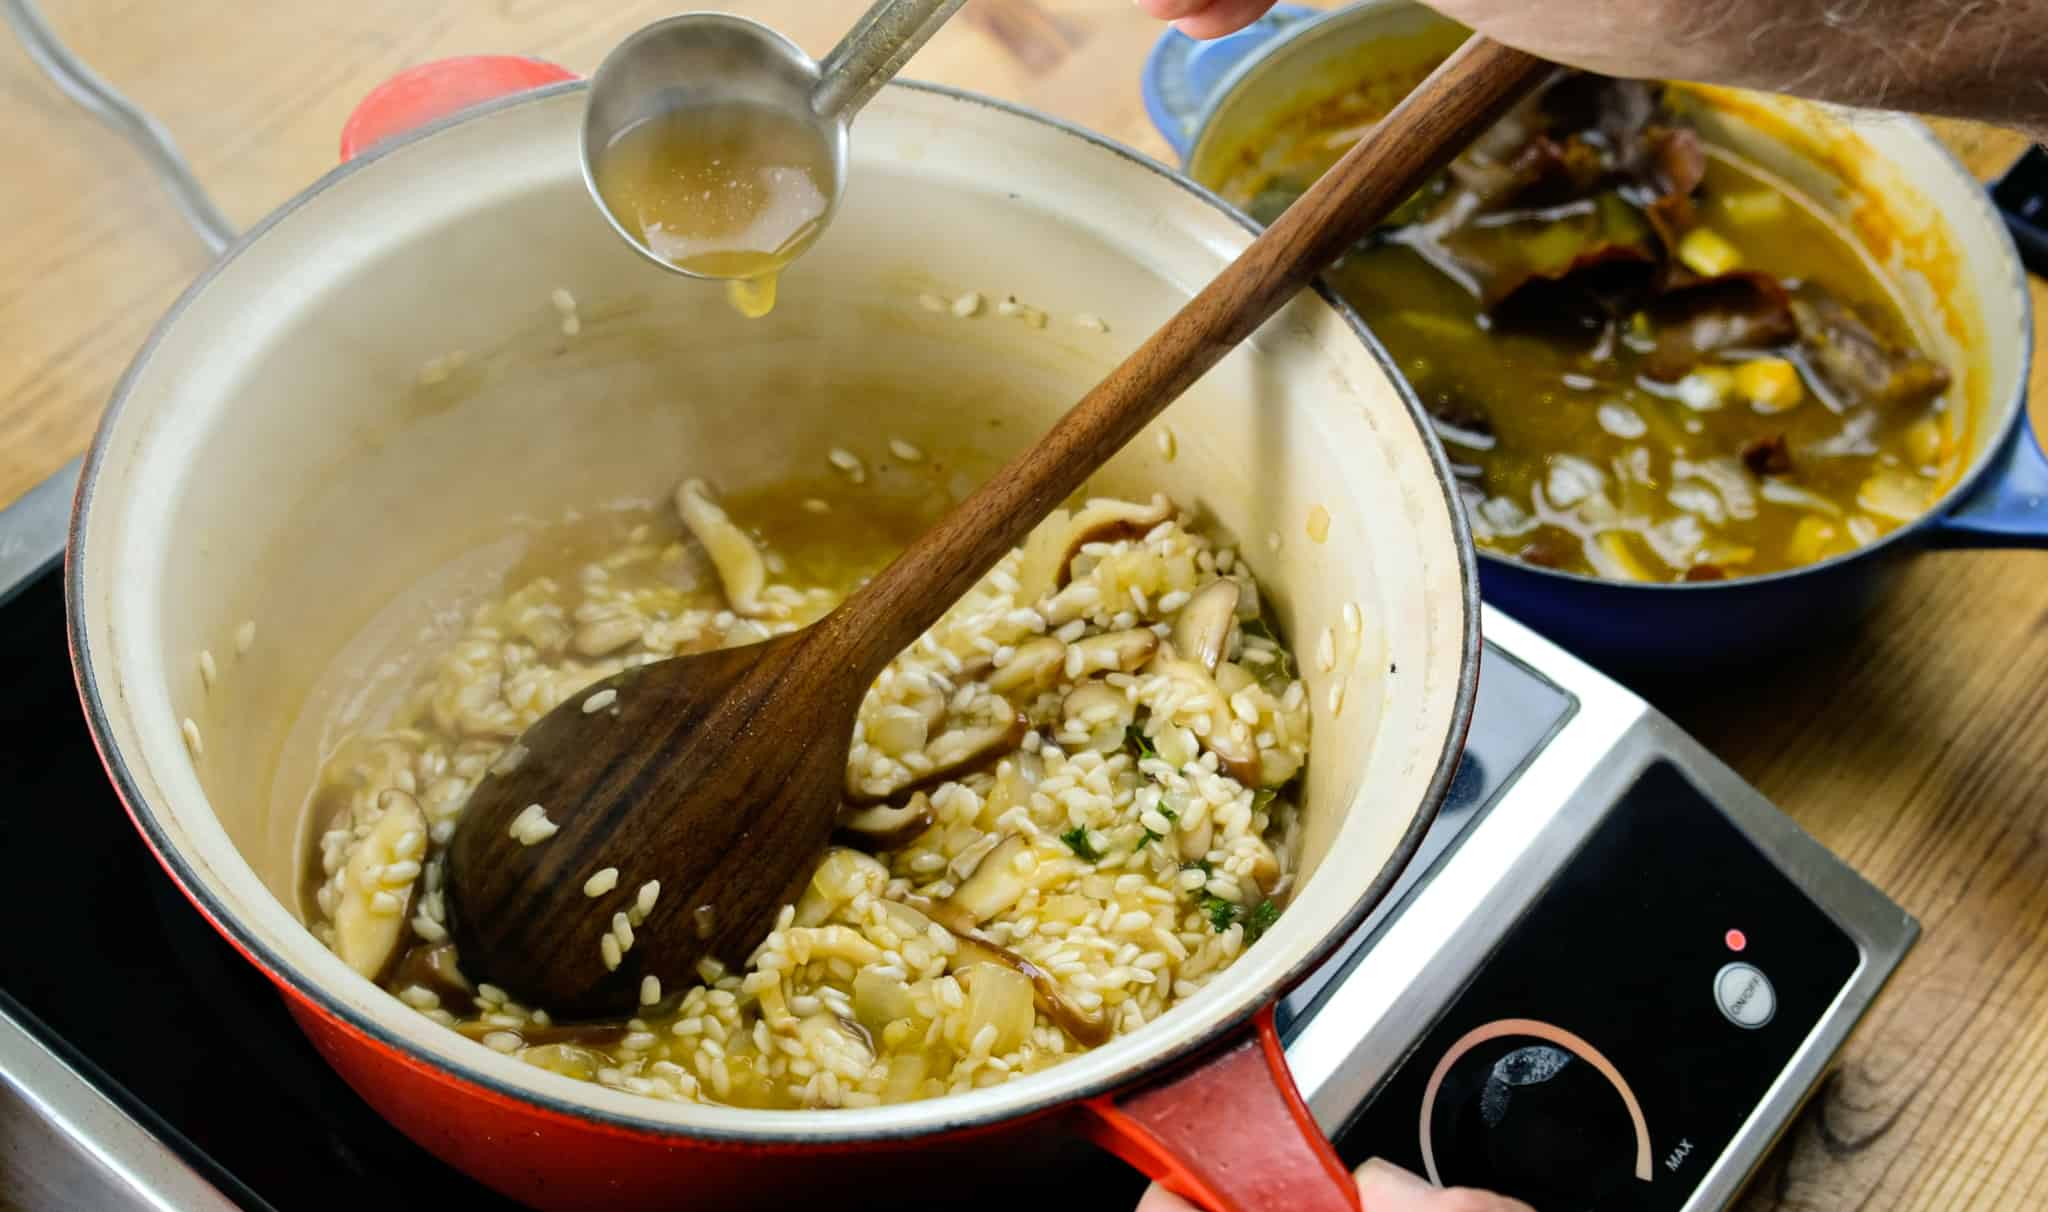 COOKING VEGAN RISOTTO